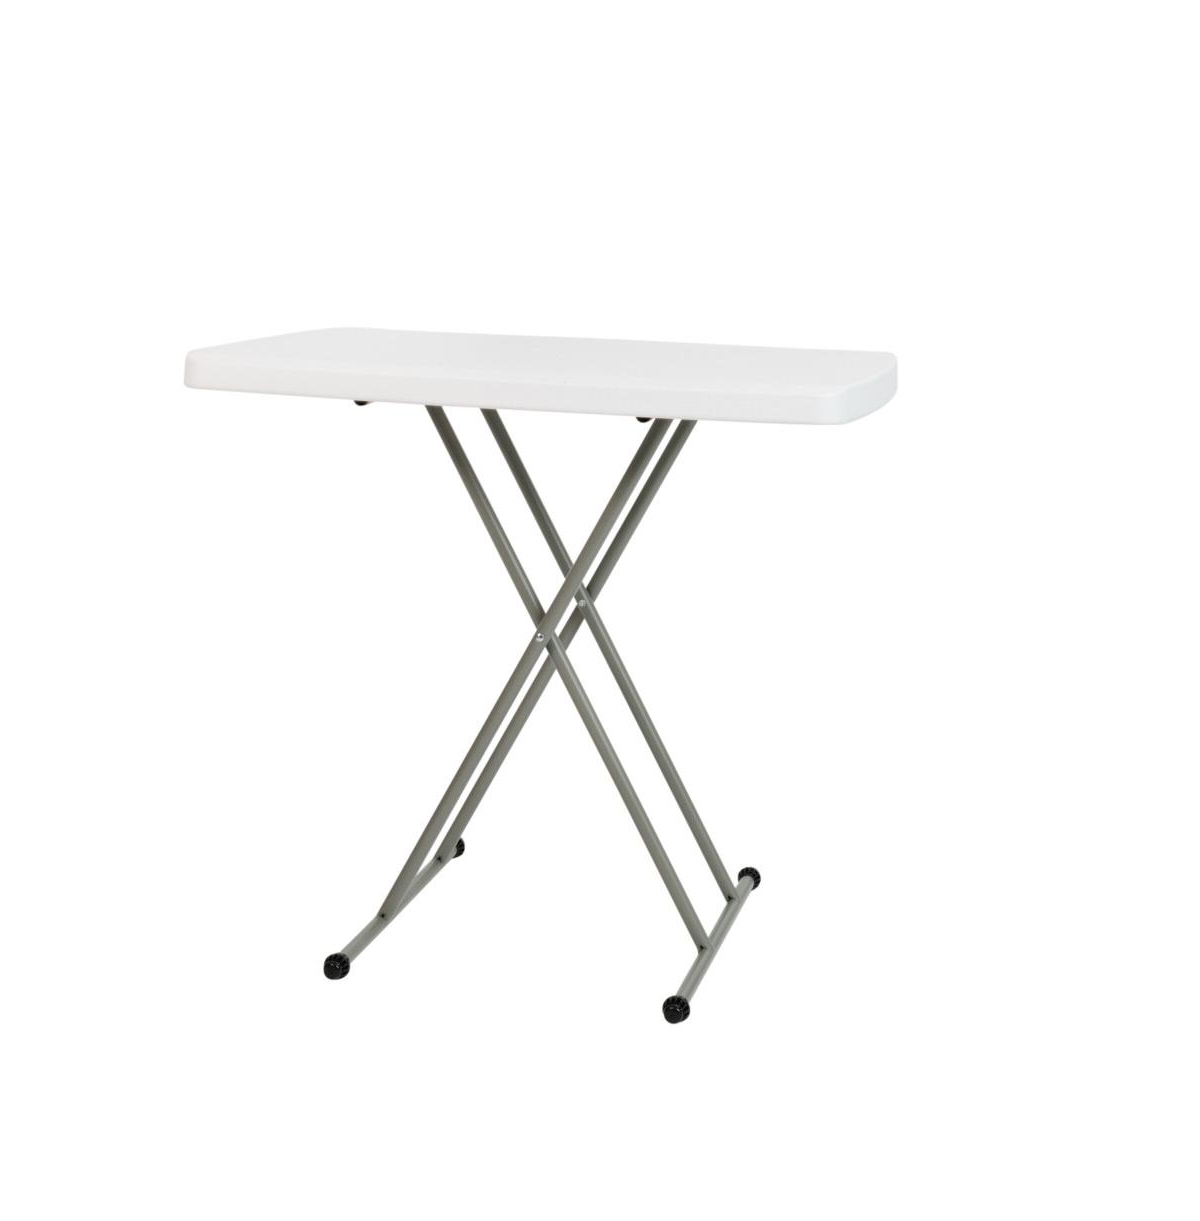 Emma+oliver Height Adjustable Plastic Folding Tv Tray/laptop Table In Granite White